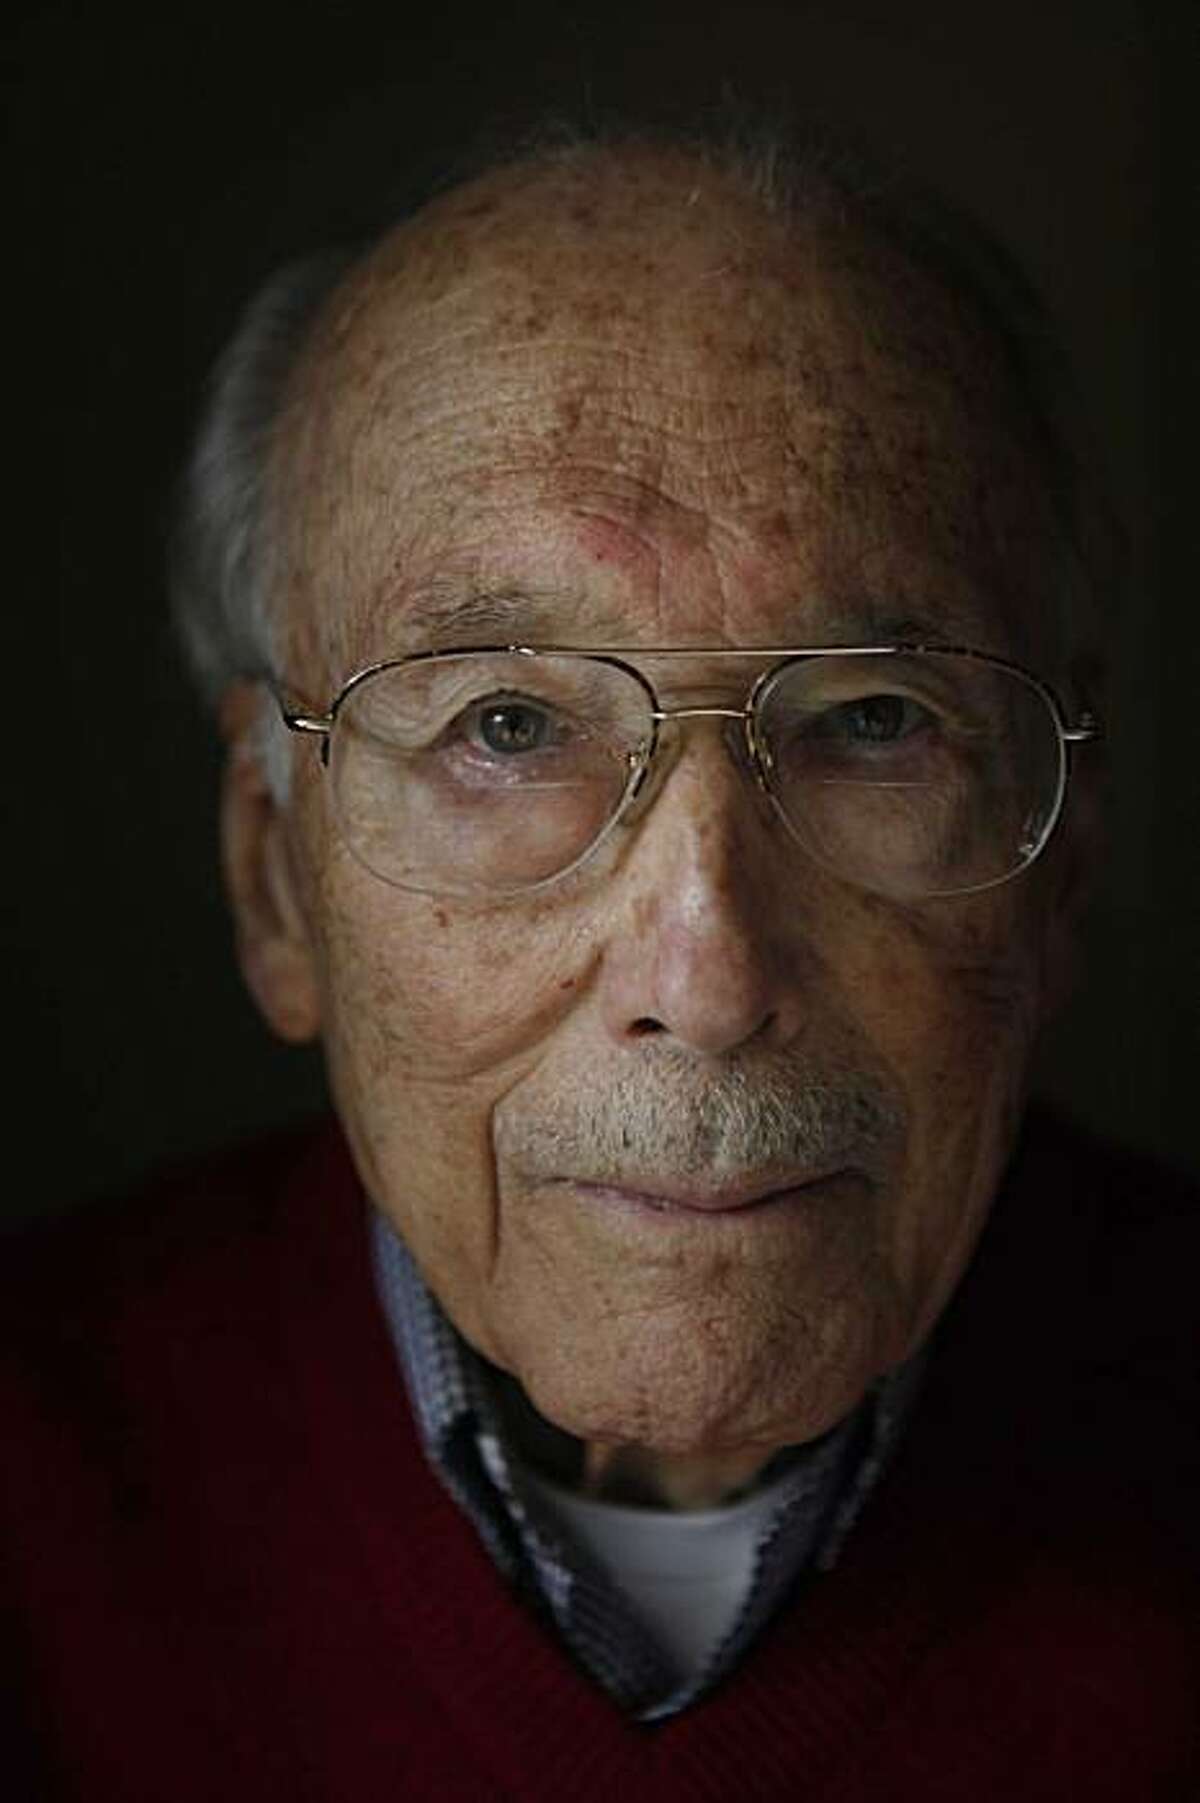 Al Nipkow, one of the few people still alive who interrogated Japanese prisoners of war in World War II at the Contra Costa prison camp in Byron, sits for a portrait in his home on Monday January 18, 2010 in Walnut Creek, Calif.